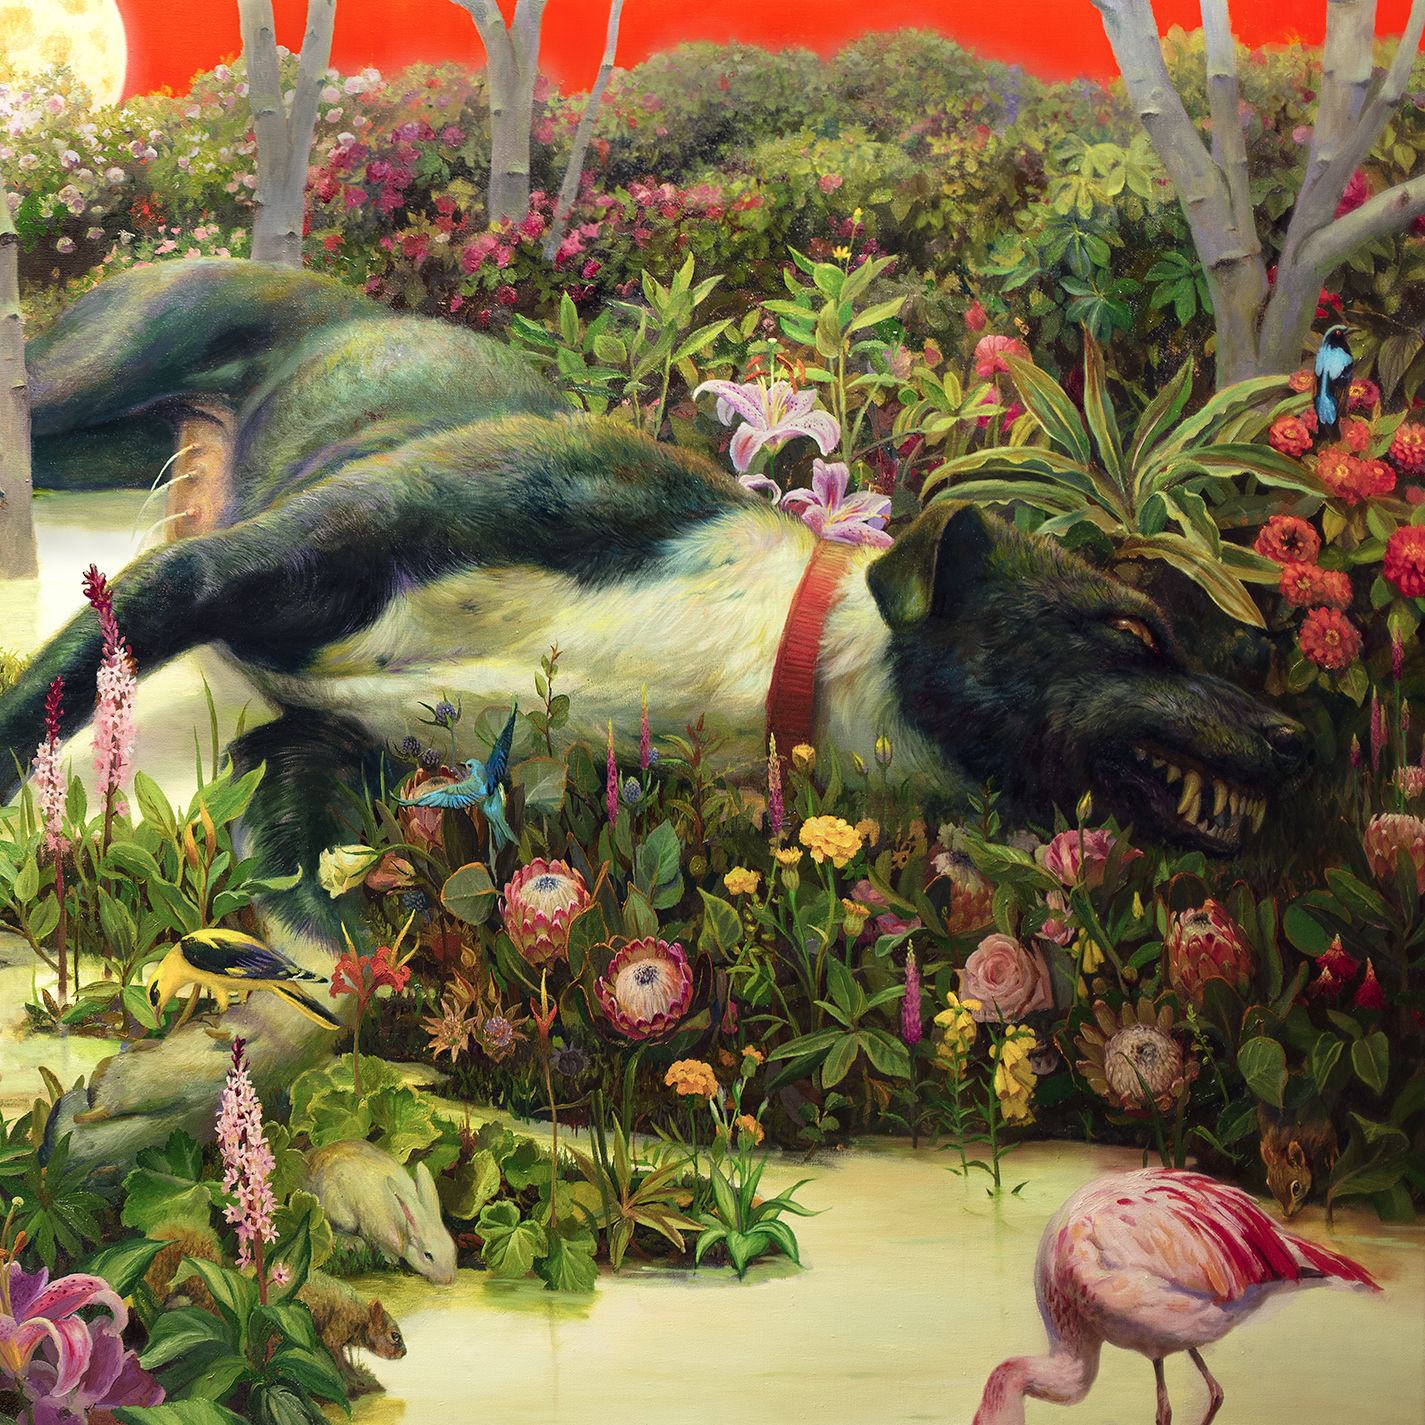 Rival Sons "Feral Roots" CD